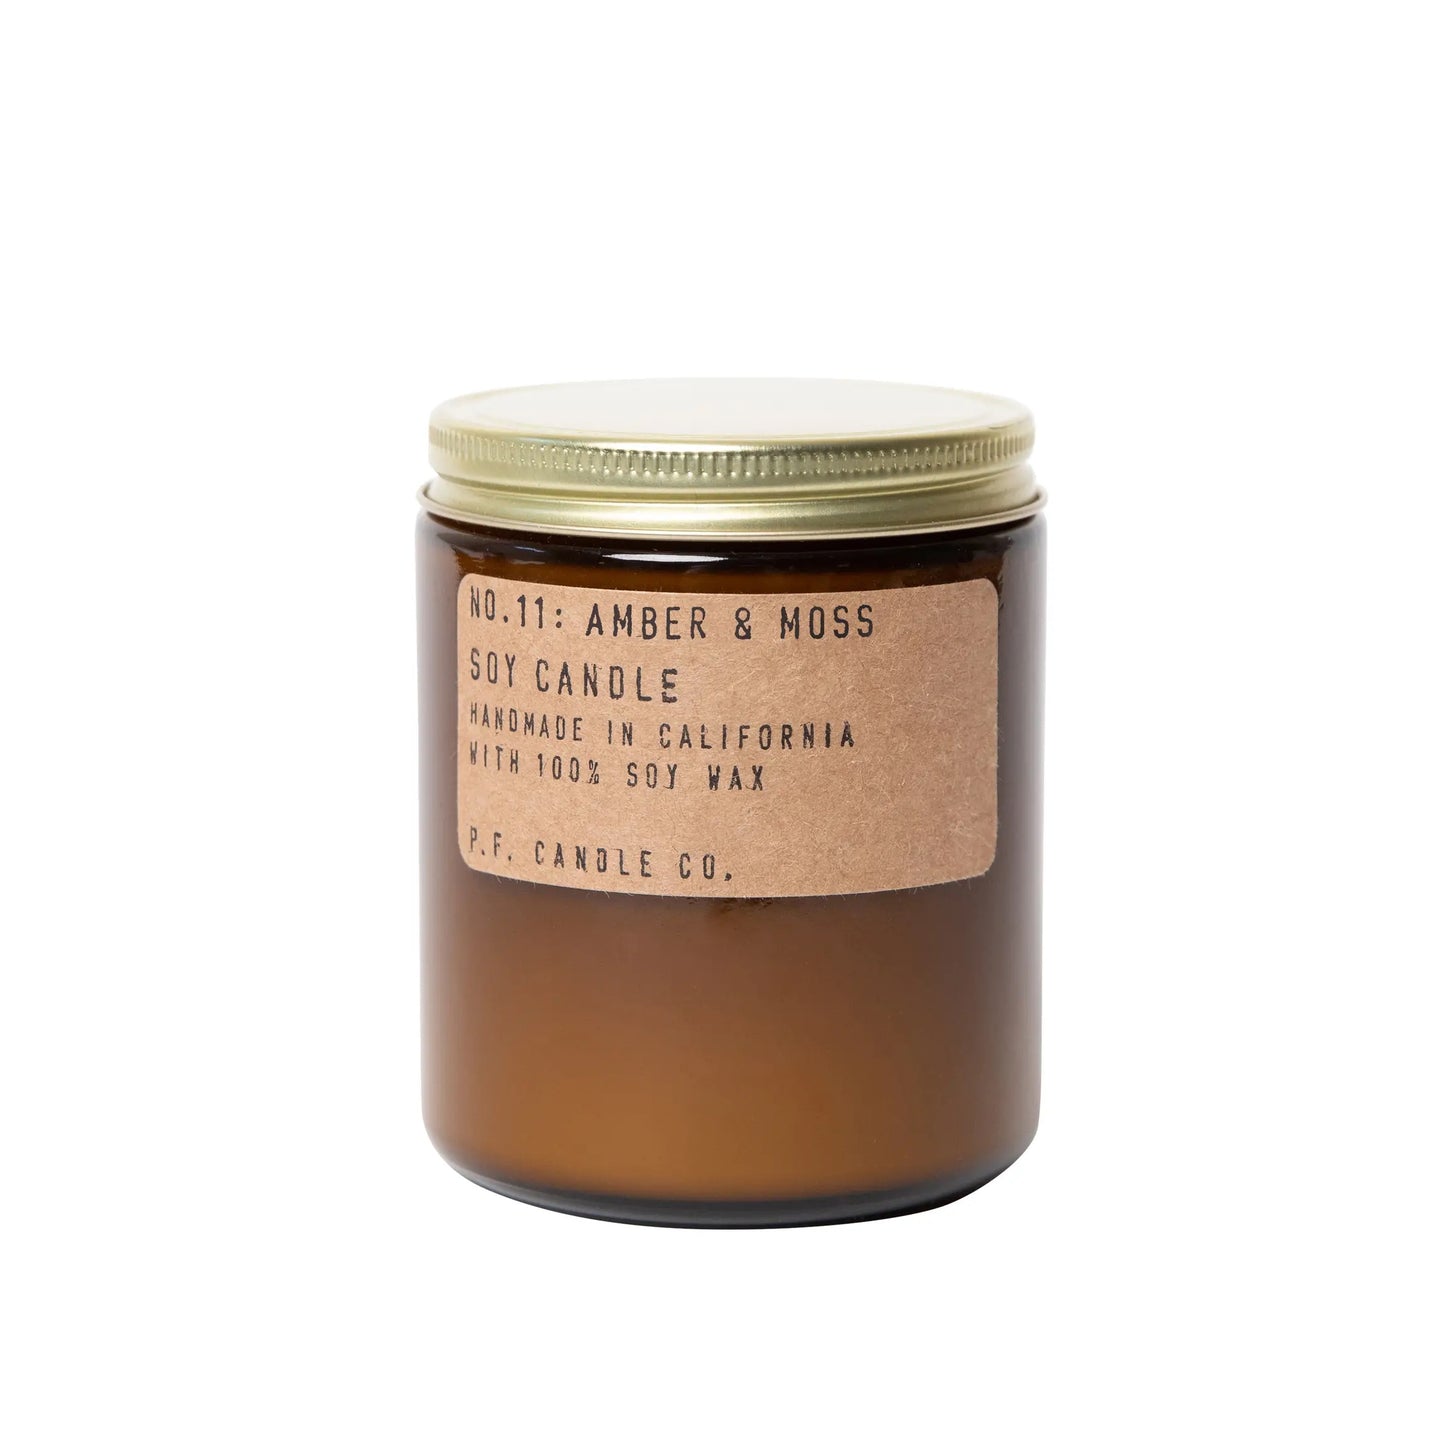 P.F. Candle Co (Amber & Moss)